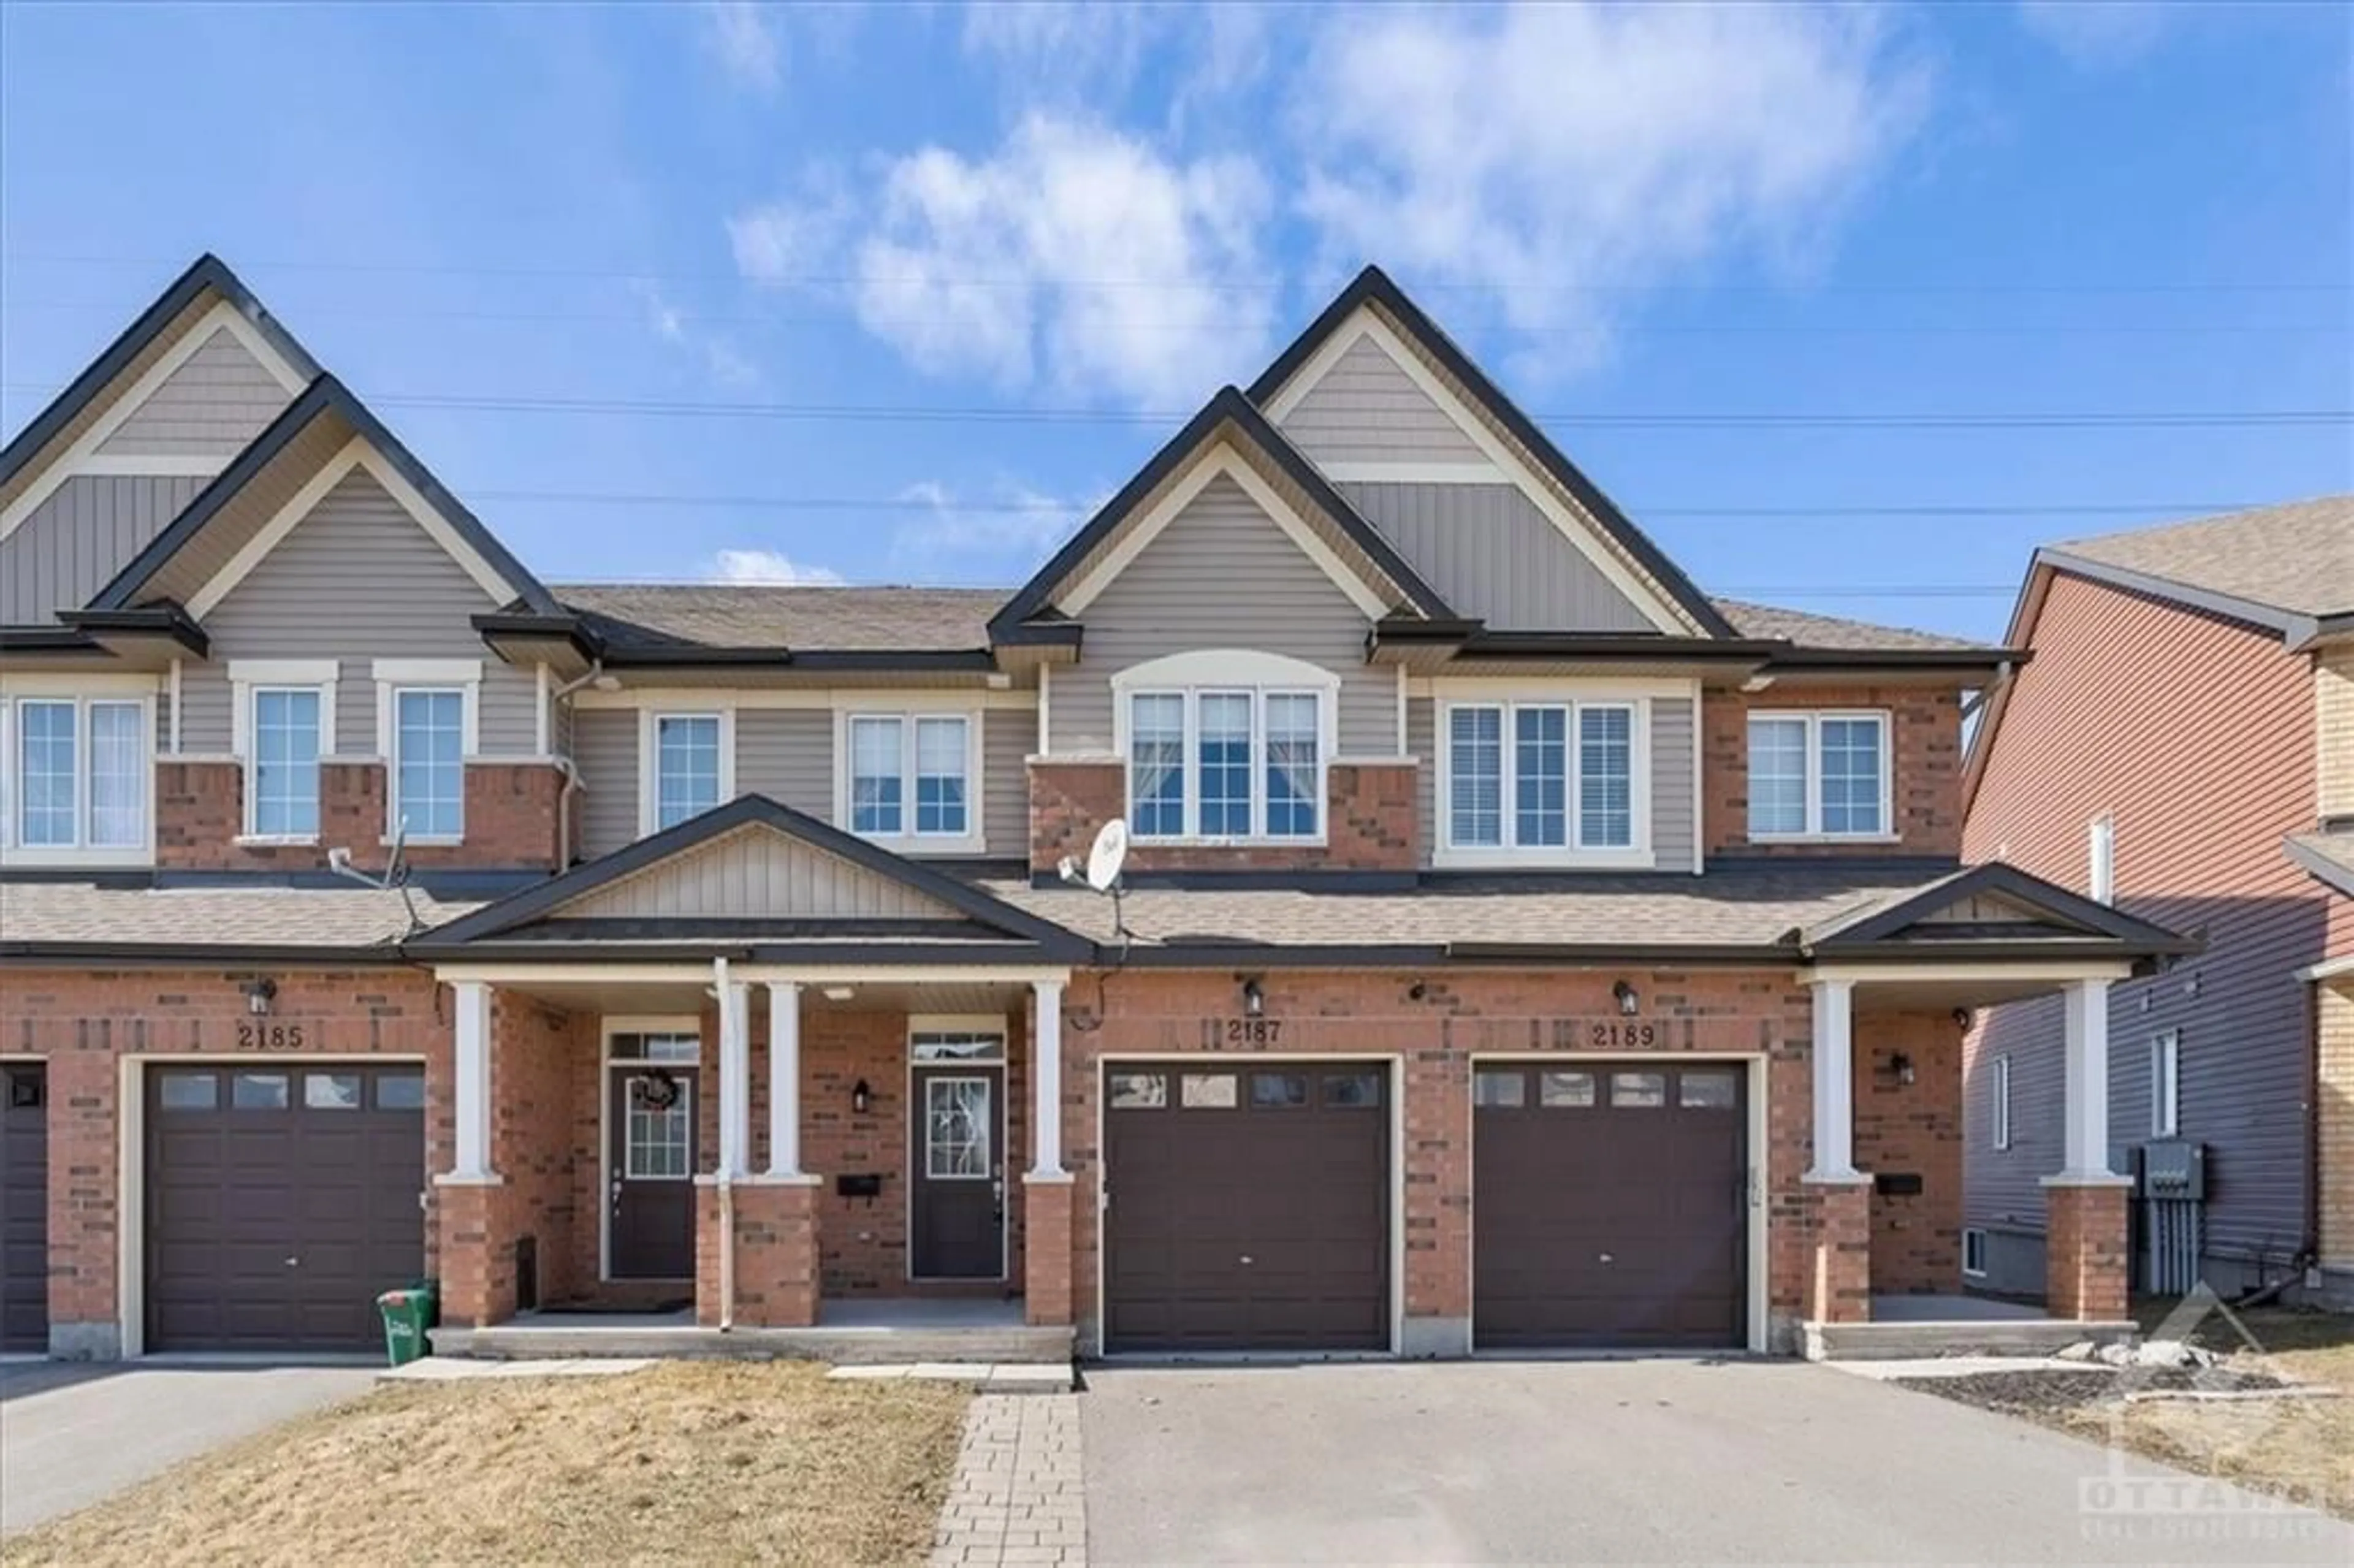 Home with brick exterior material for 2187 MONDAVI St, Orleans Ontario K4A 4R7